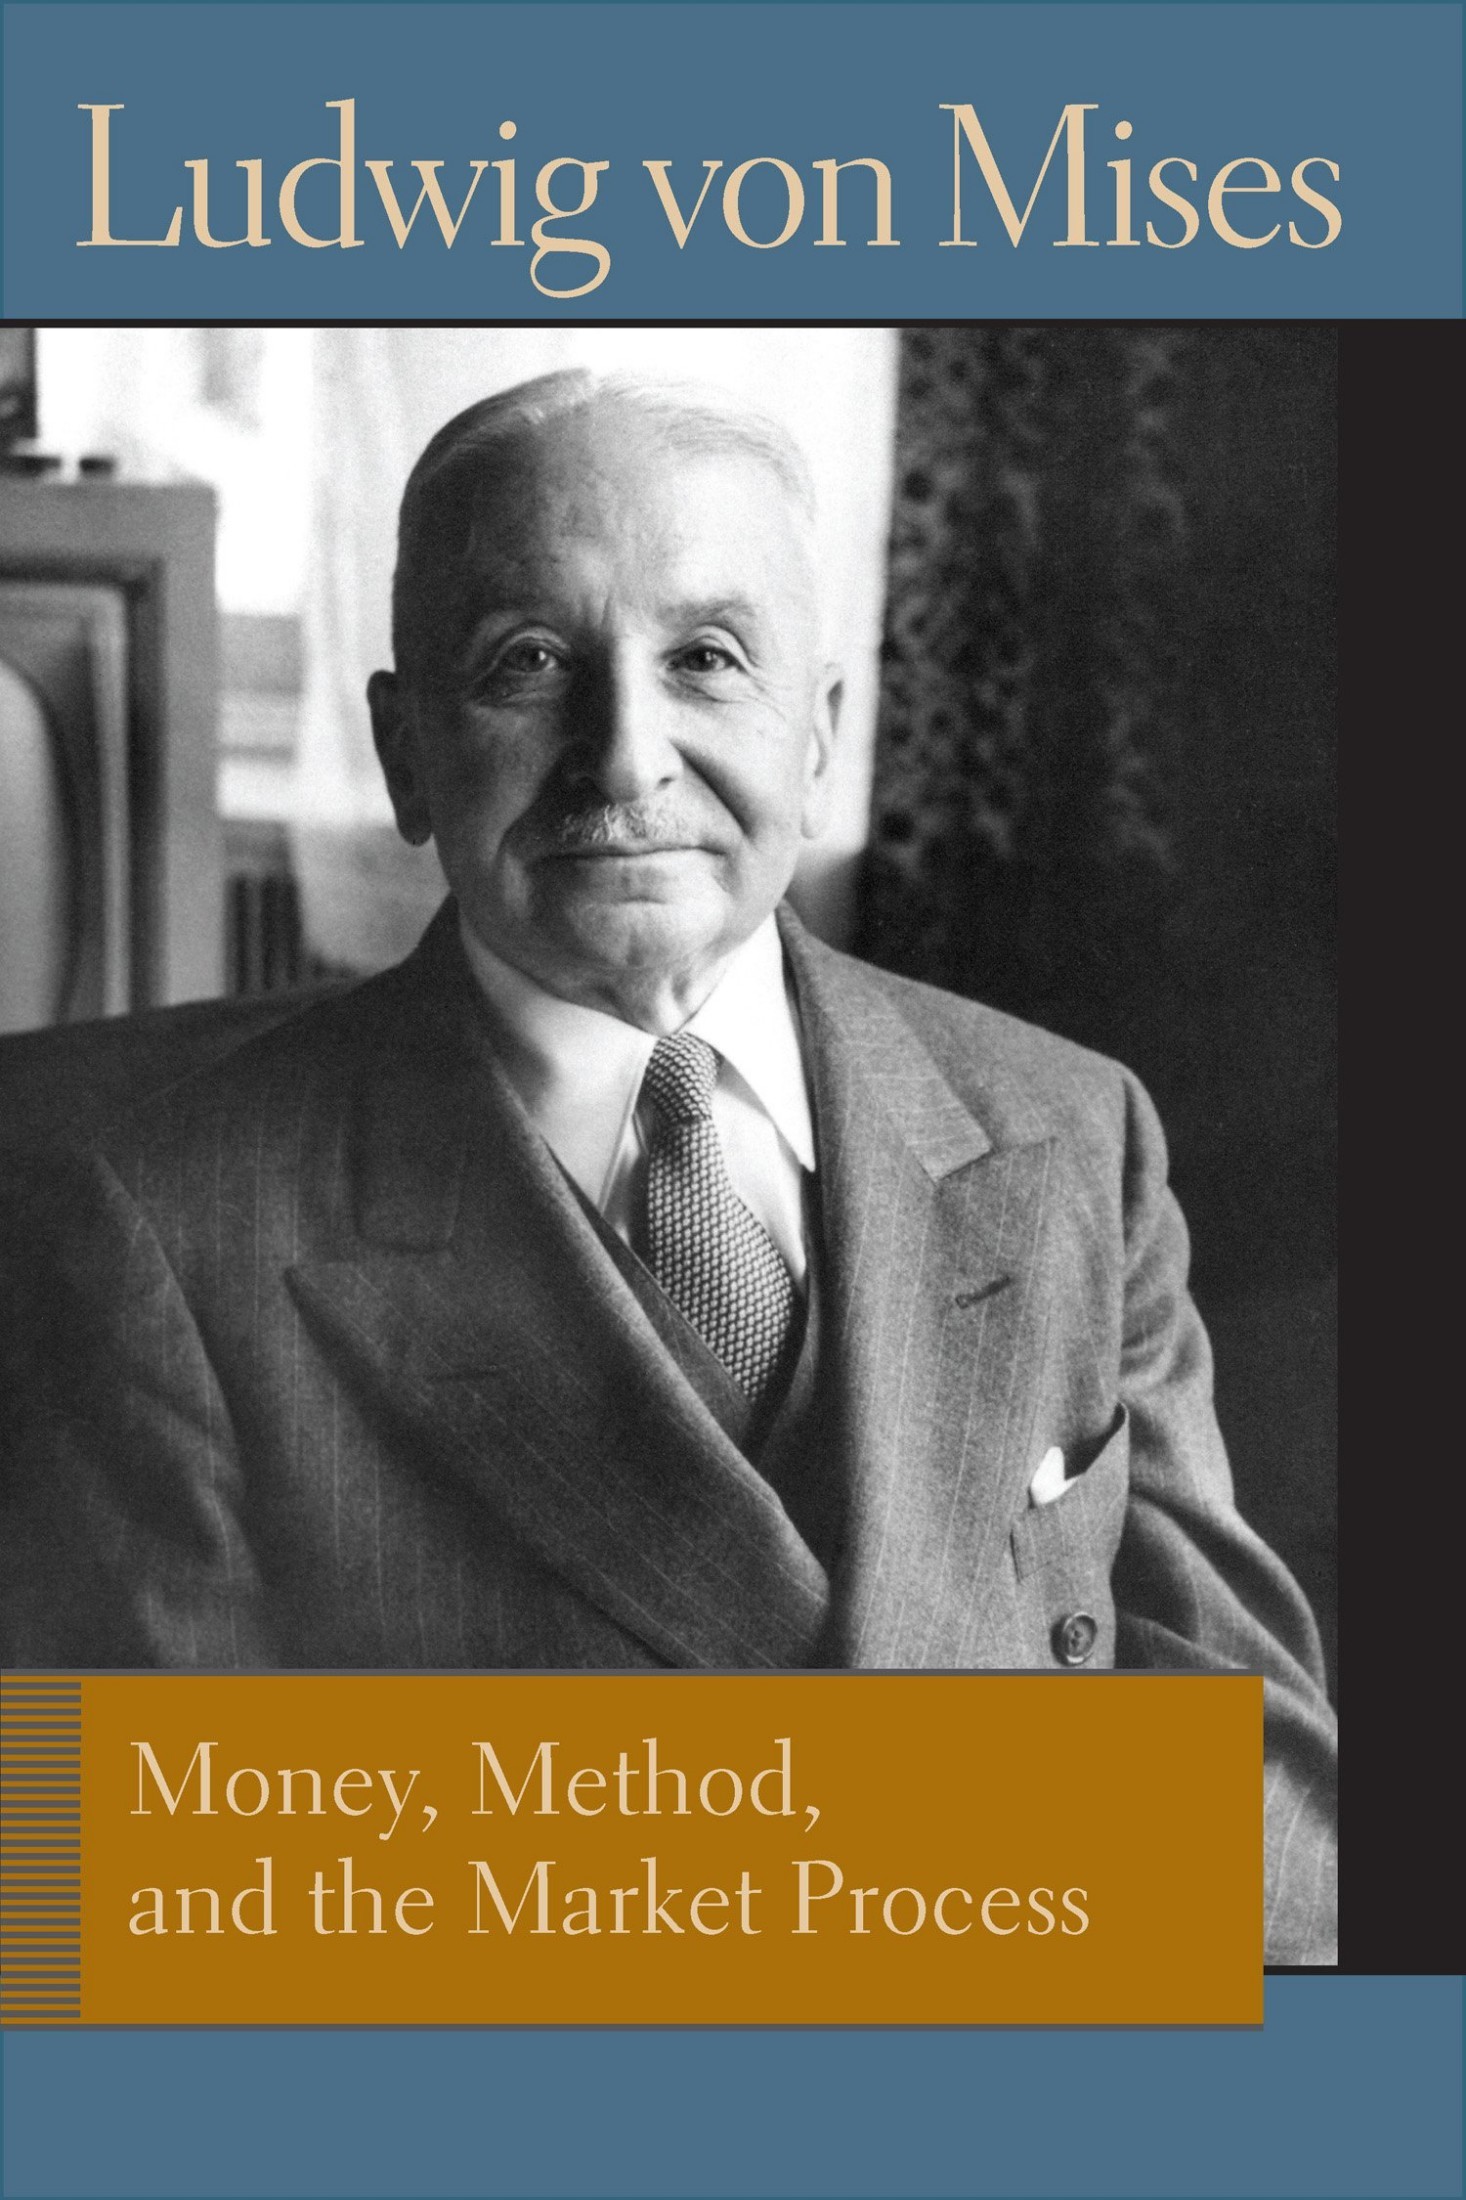 Money, Method, and the Market Process: Essays by Ludwig Von Mises